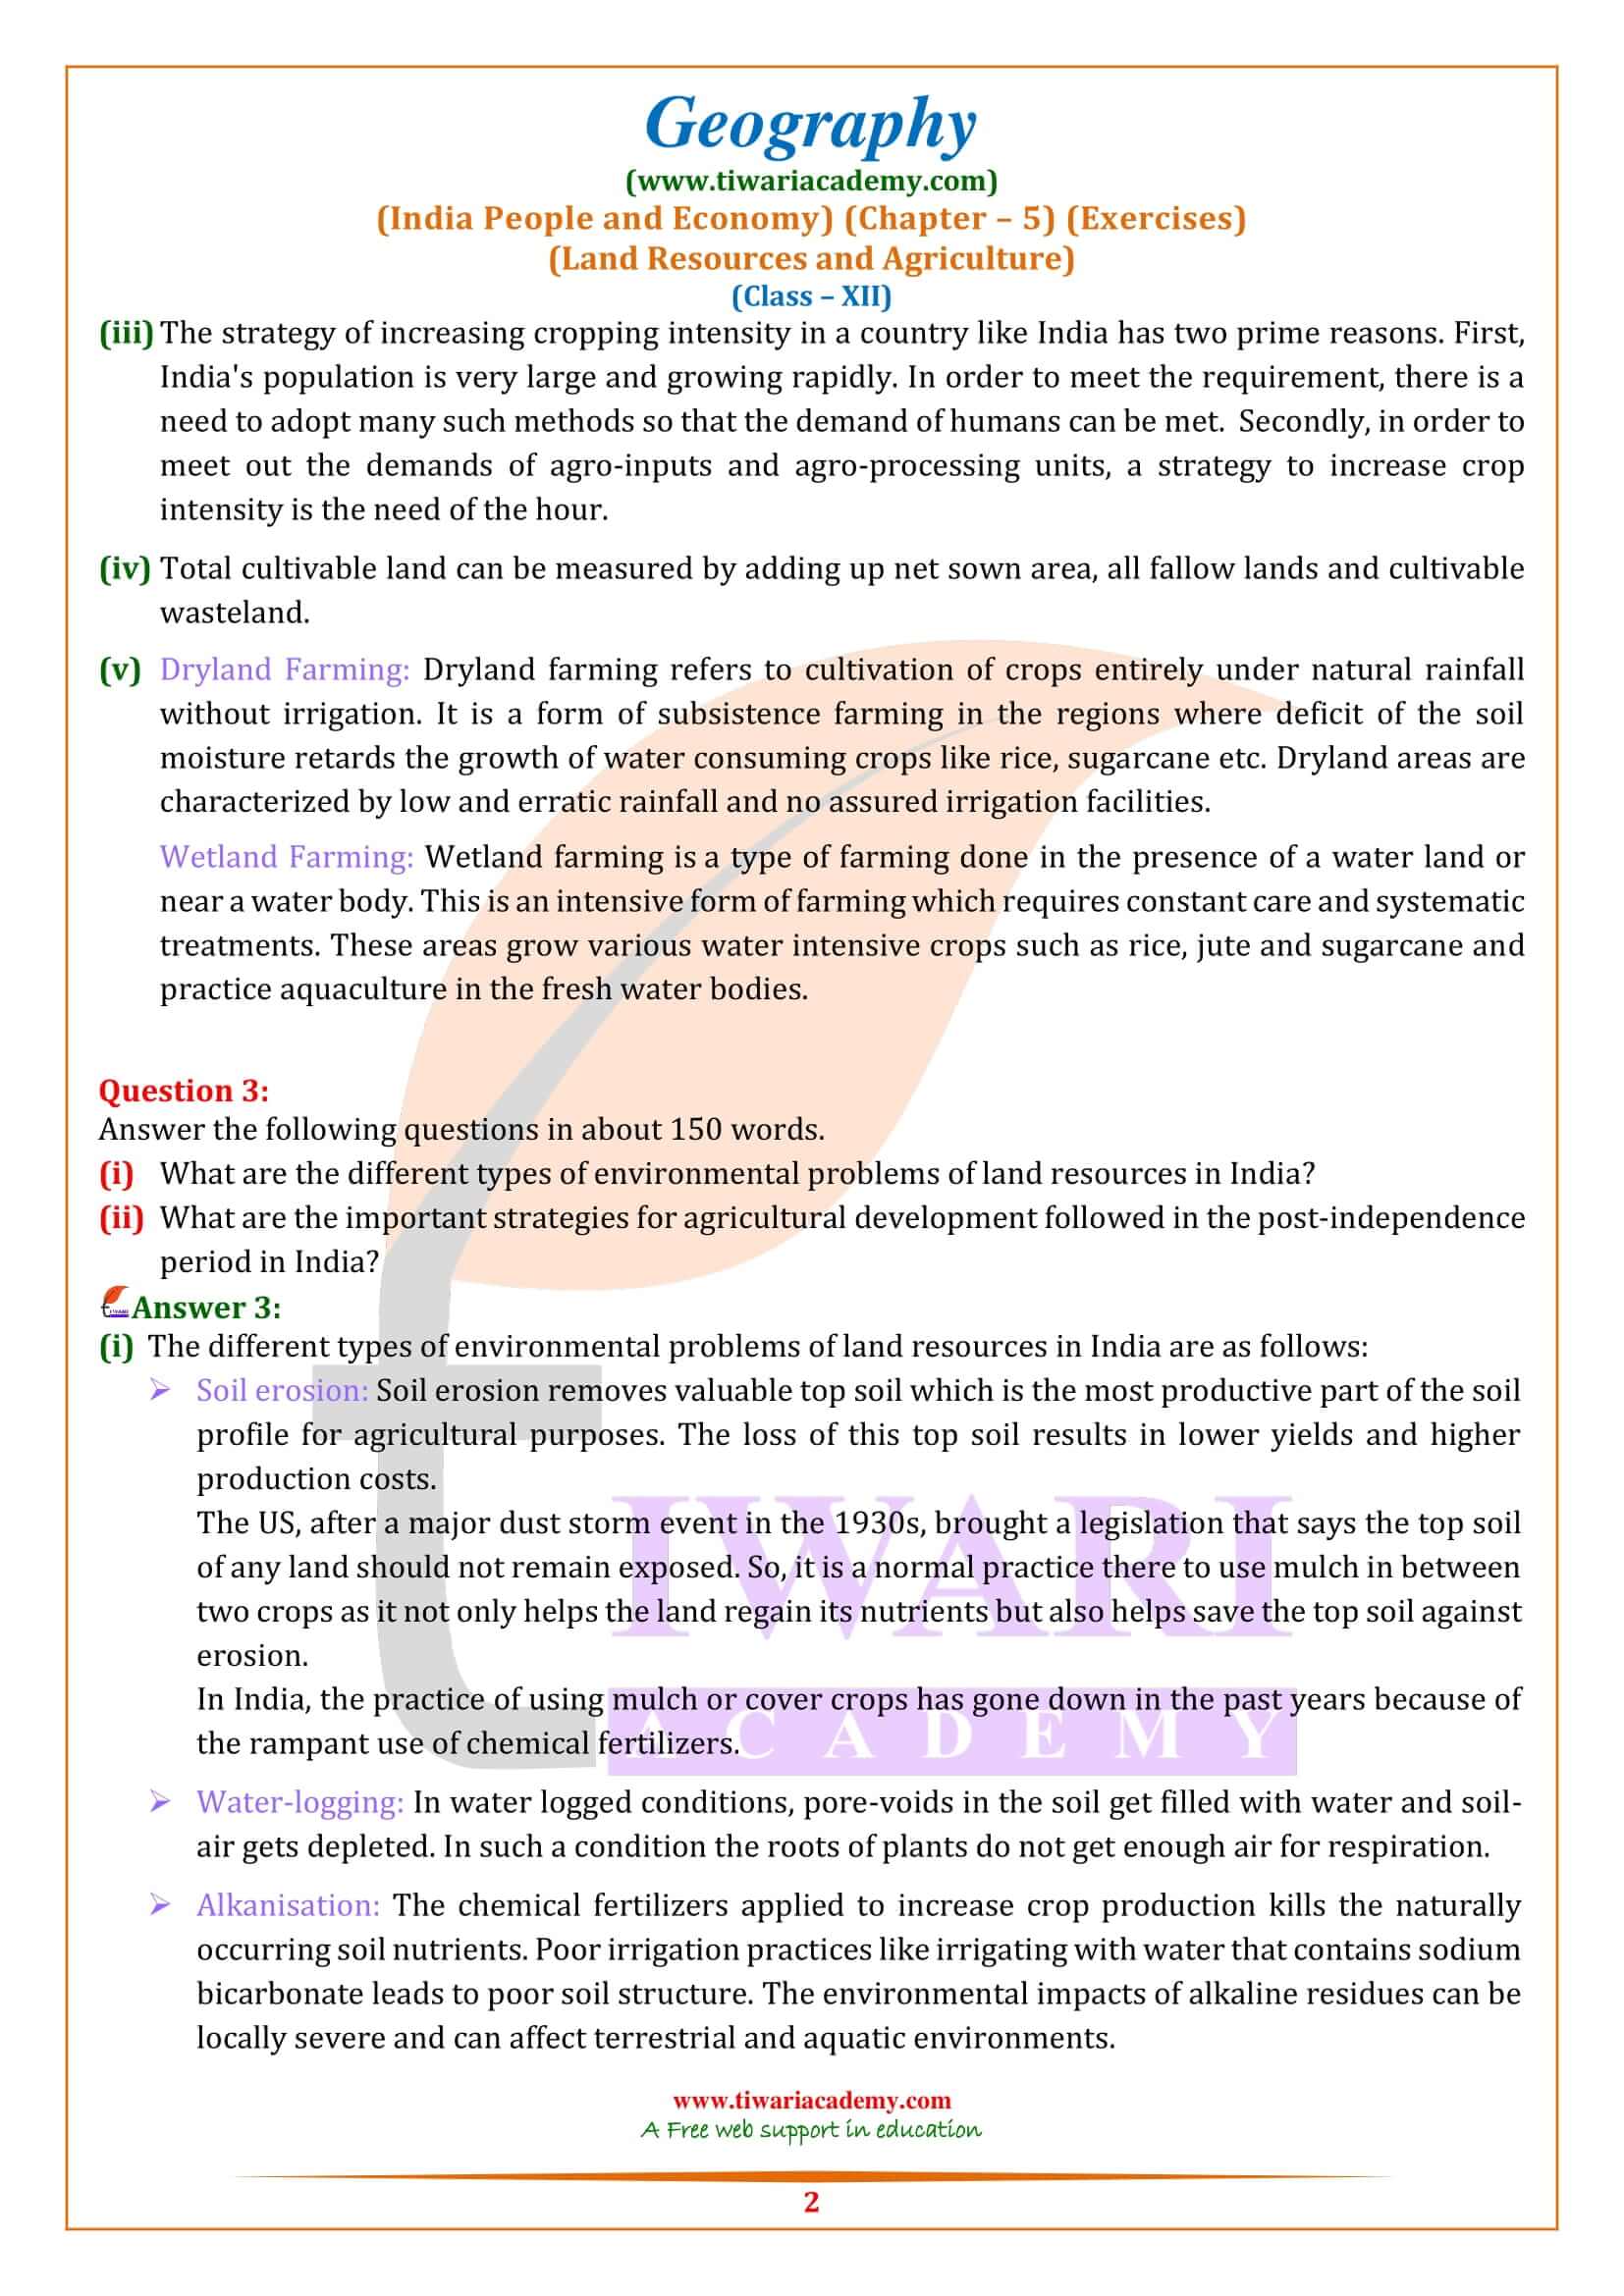 NCERT Solutions for Class 12 Geography Chapter 5 in English Medium